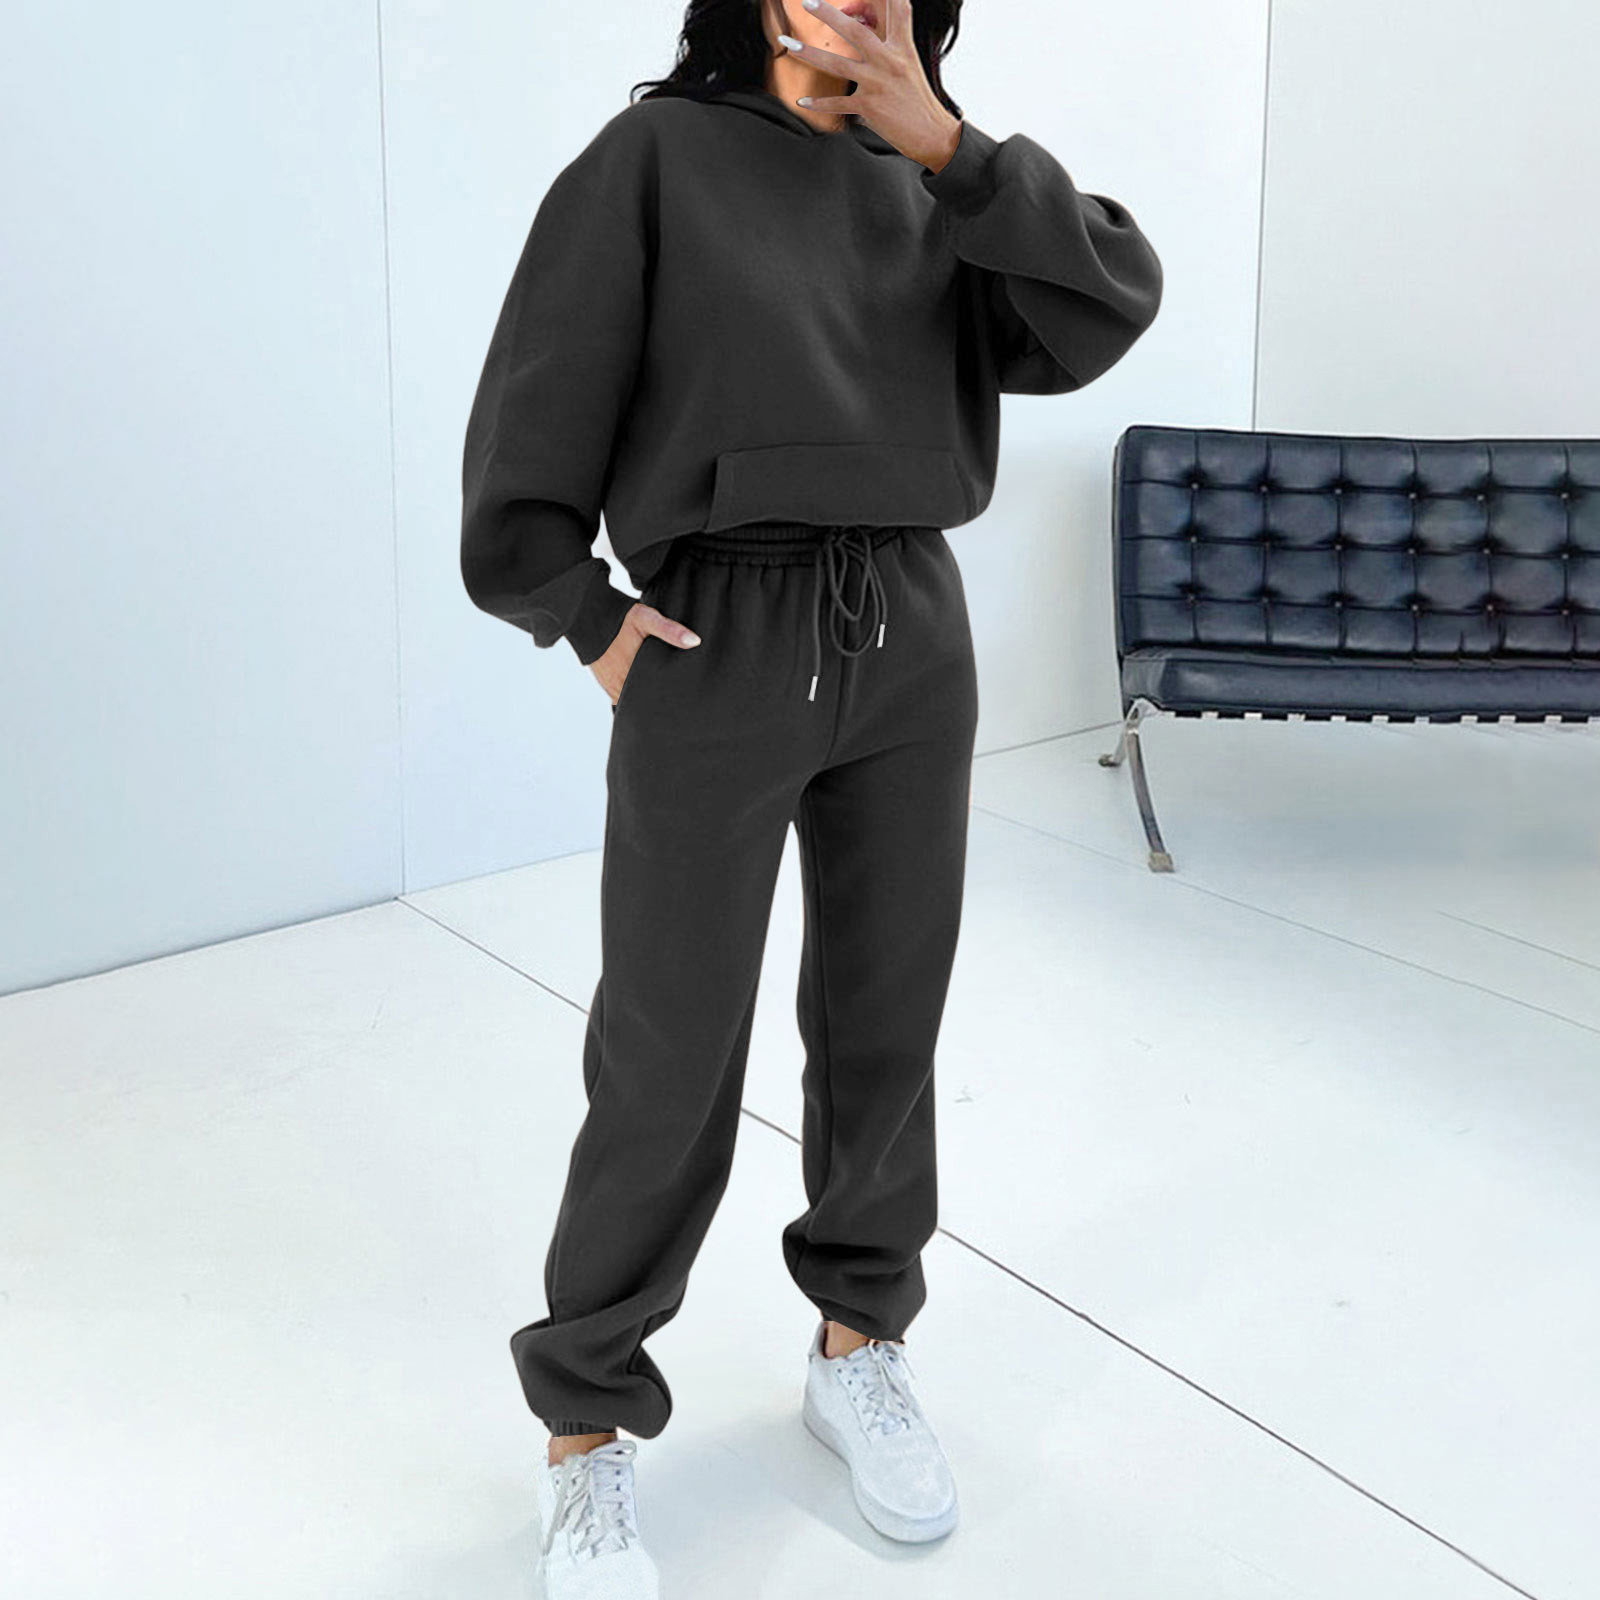 skpabo Women Tracksuit Set Oversized Tracksuits 2 Piece Outfit Hooded ...